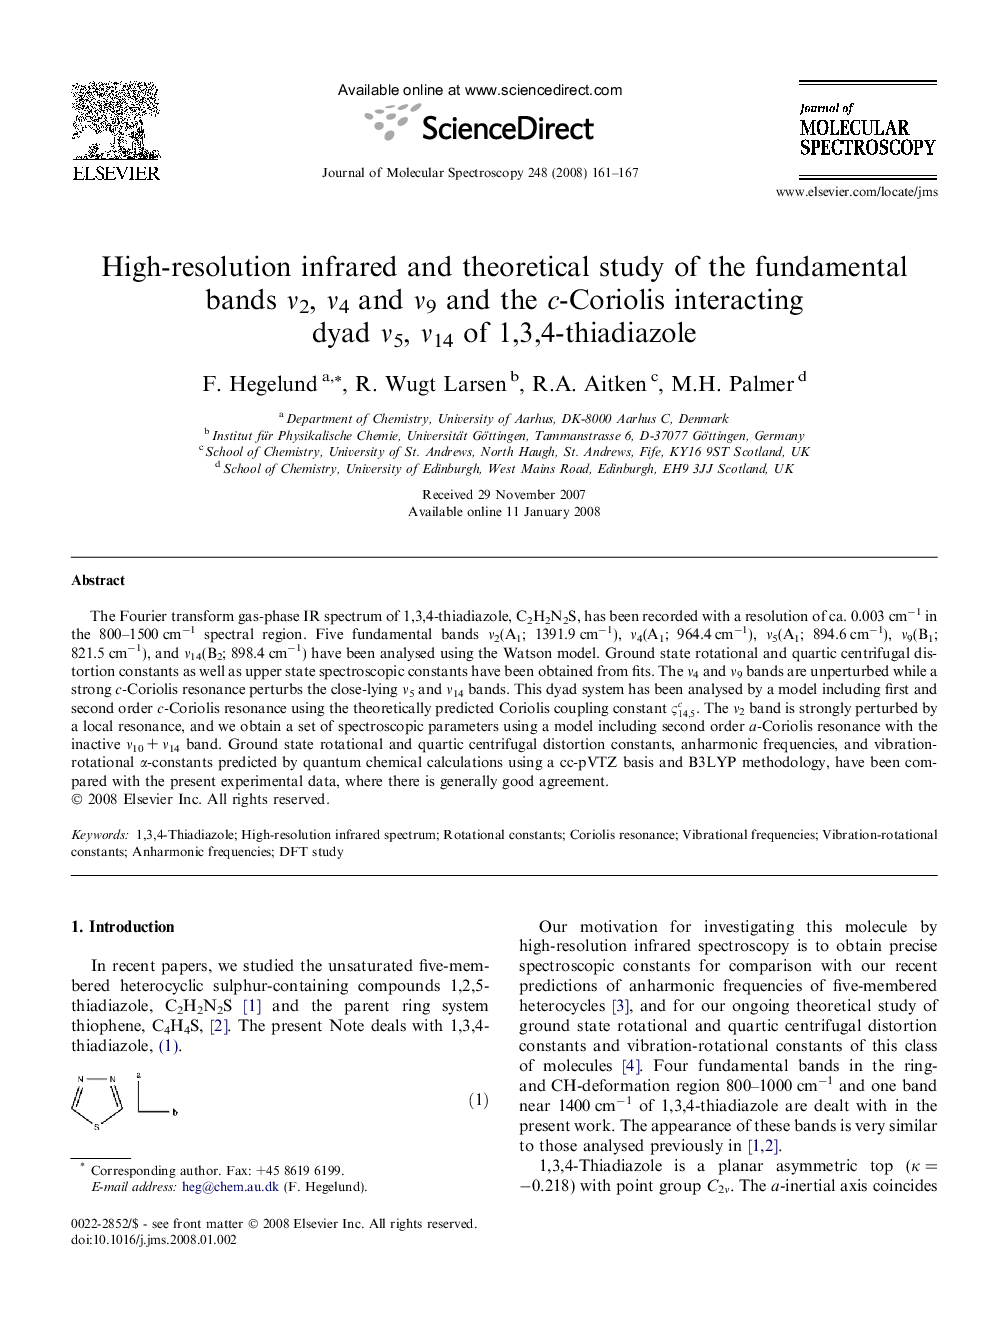 High-resolution infrared and theoretical study of the fundamental bands Î½2, Î½4 and Î½9 and the c-Coriolis interacting dyad Î½5, Î½14 of 1,3,4-thiadiazole